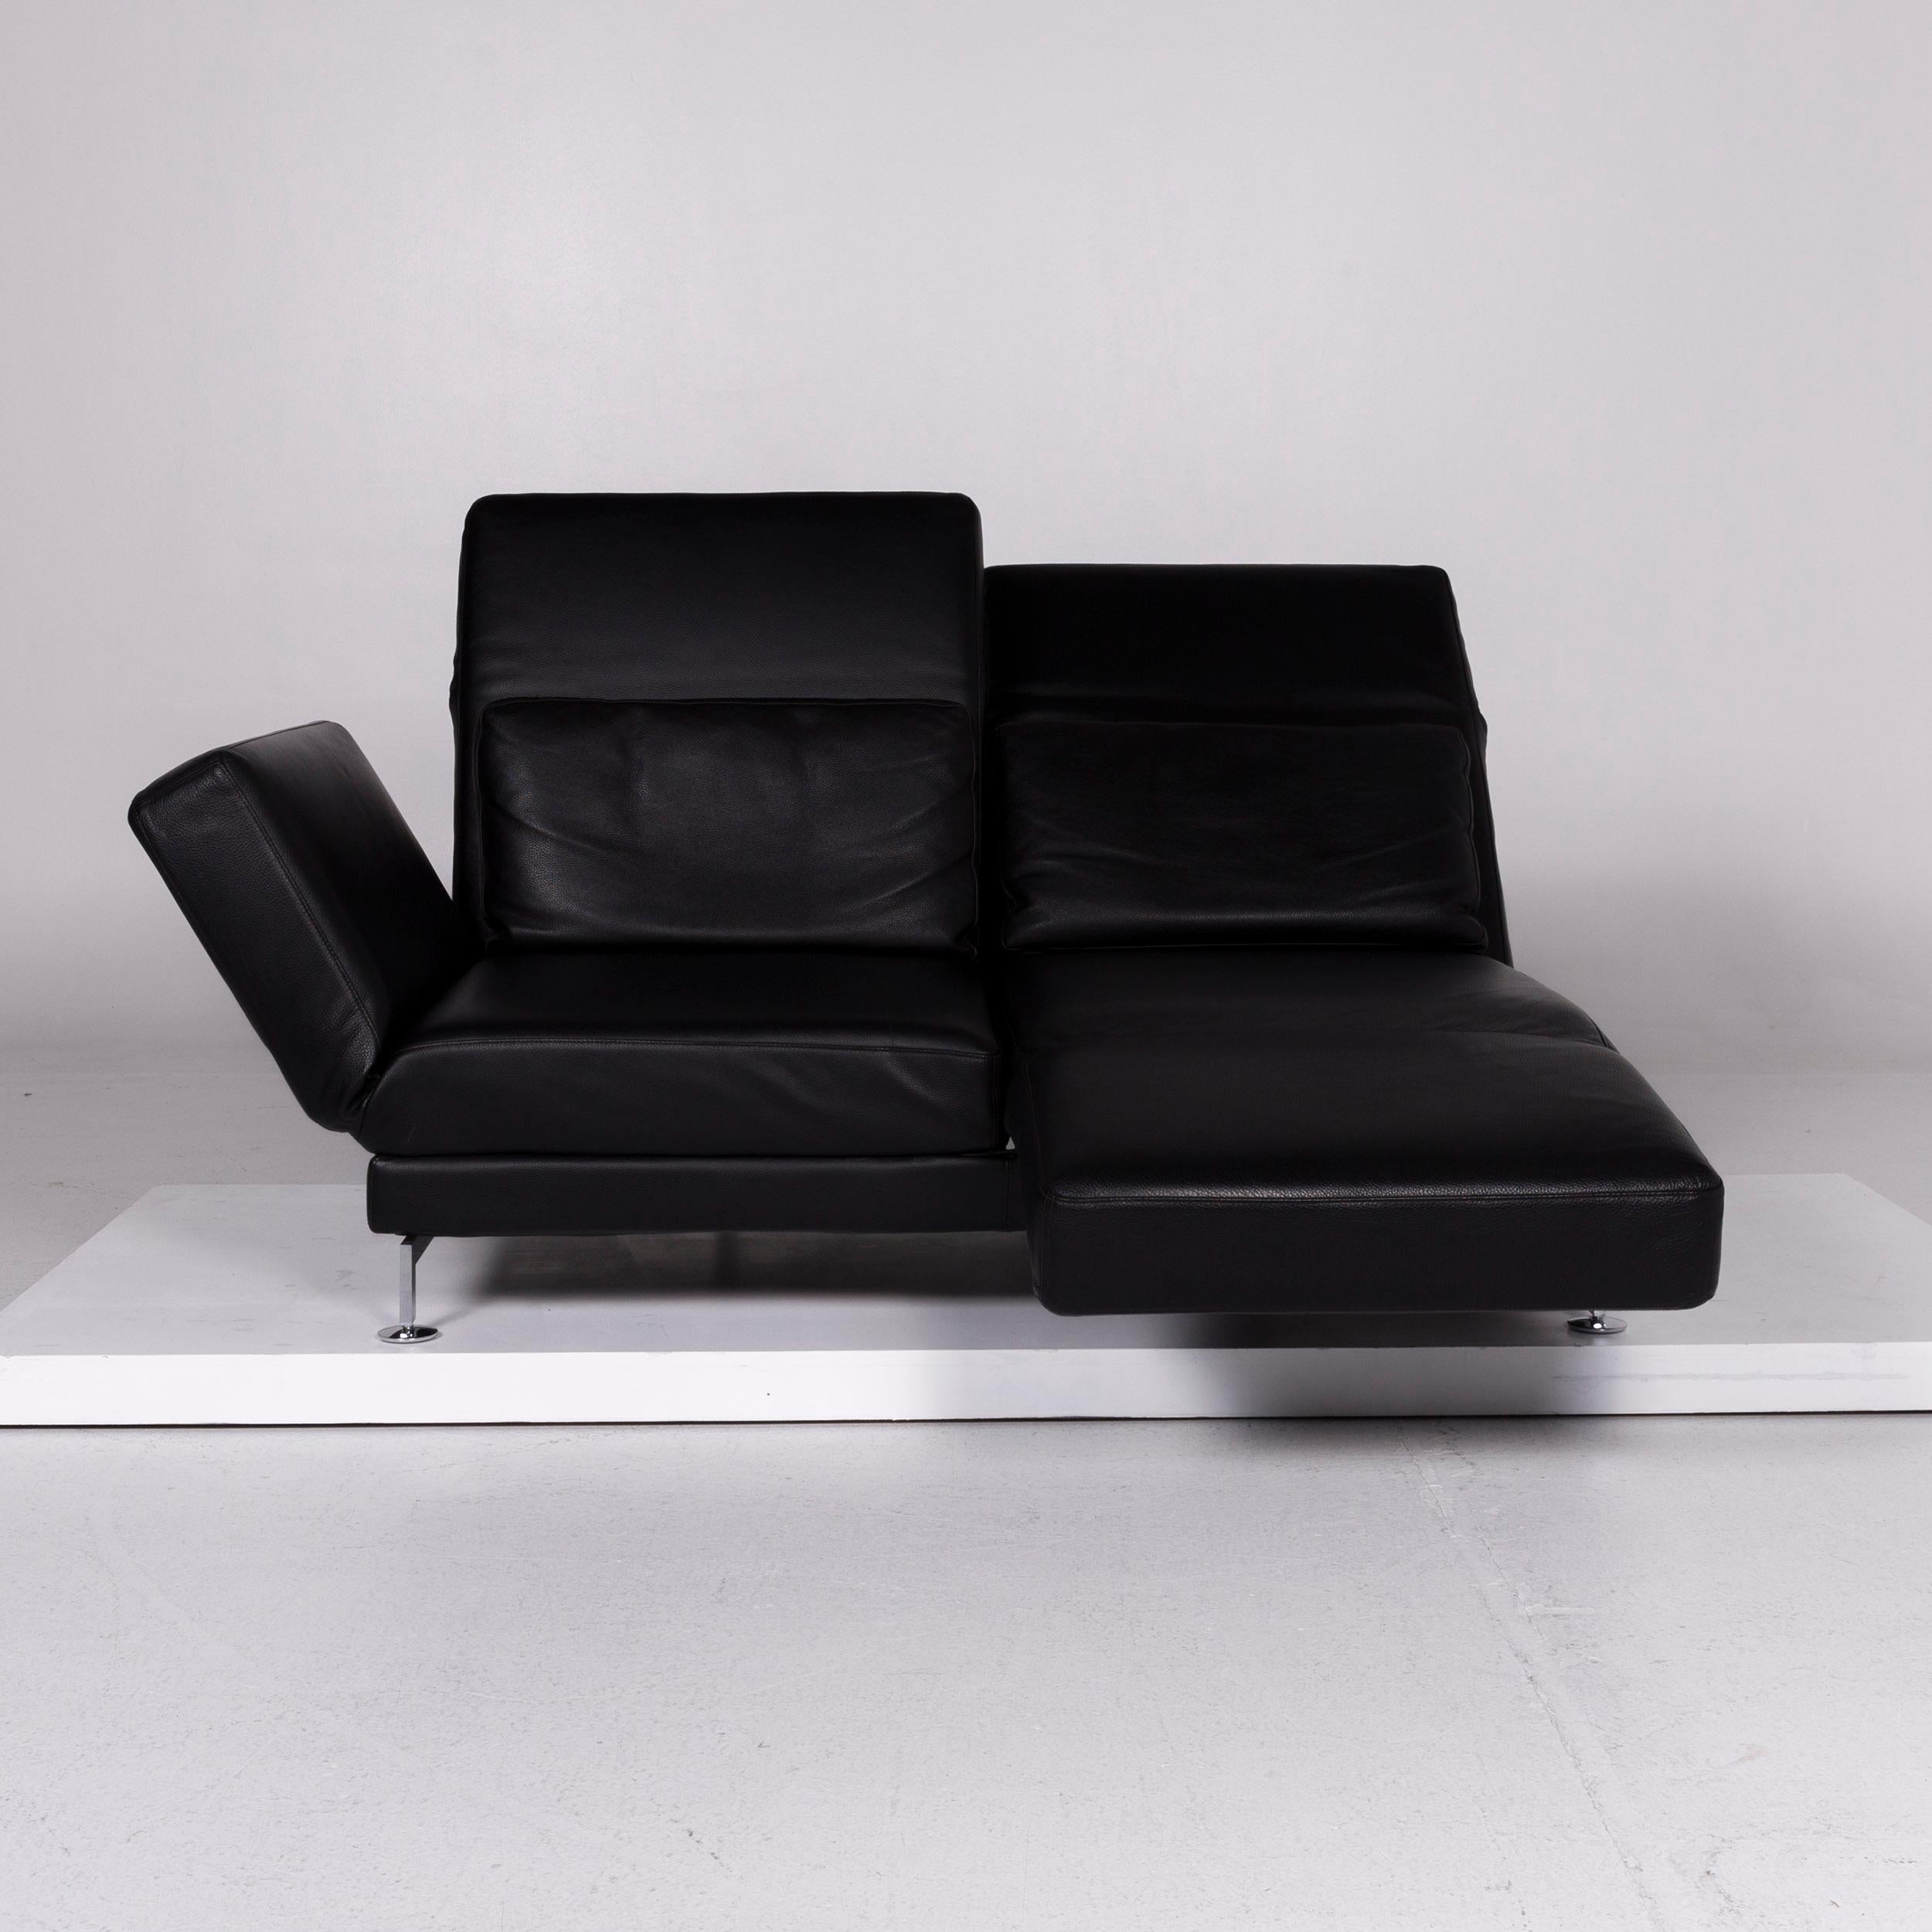 We bring to you a Brühl & Sippold Moule leather sofa black two-seat include function.

 
 Product measurements in centimeters:
 
Depth 96
Width 191
Height 105
Seat-height 42
Rest-height 41
Seat-depth 54
Seat-width 136
Back-height 63.